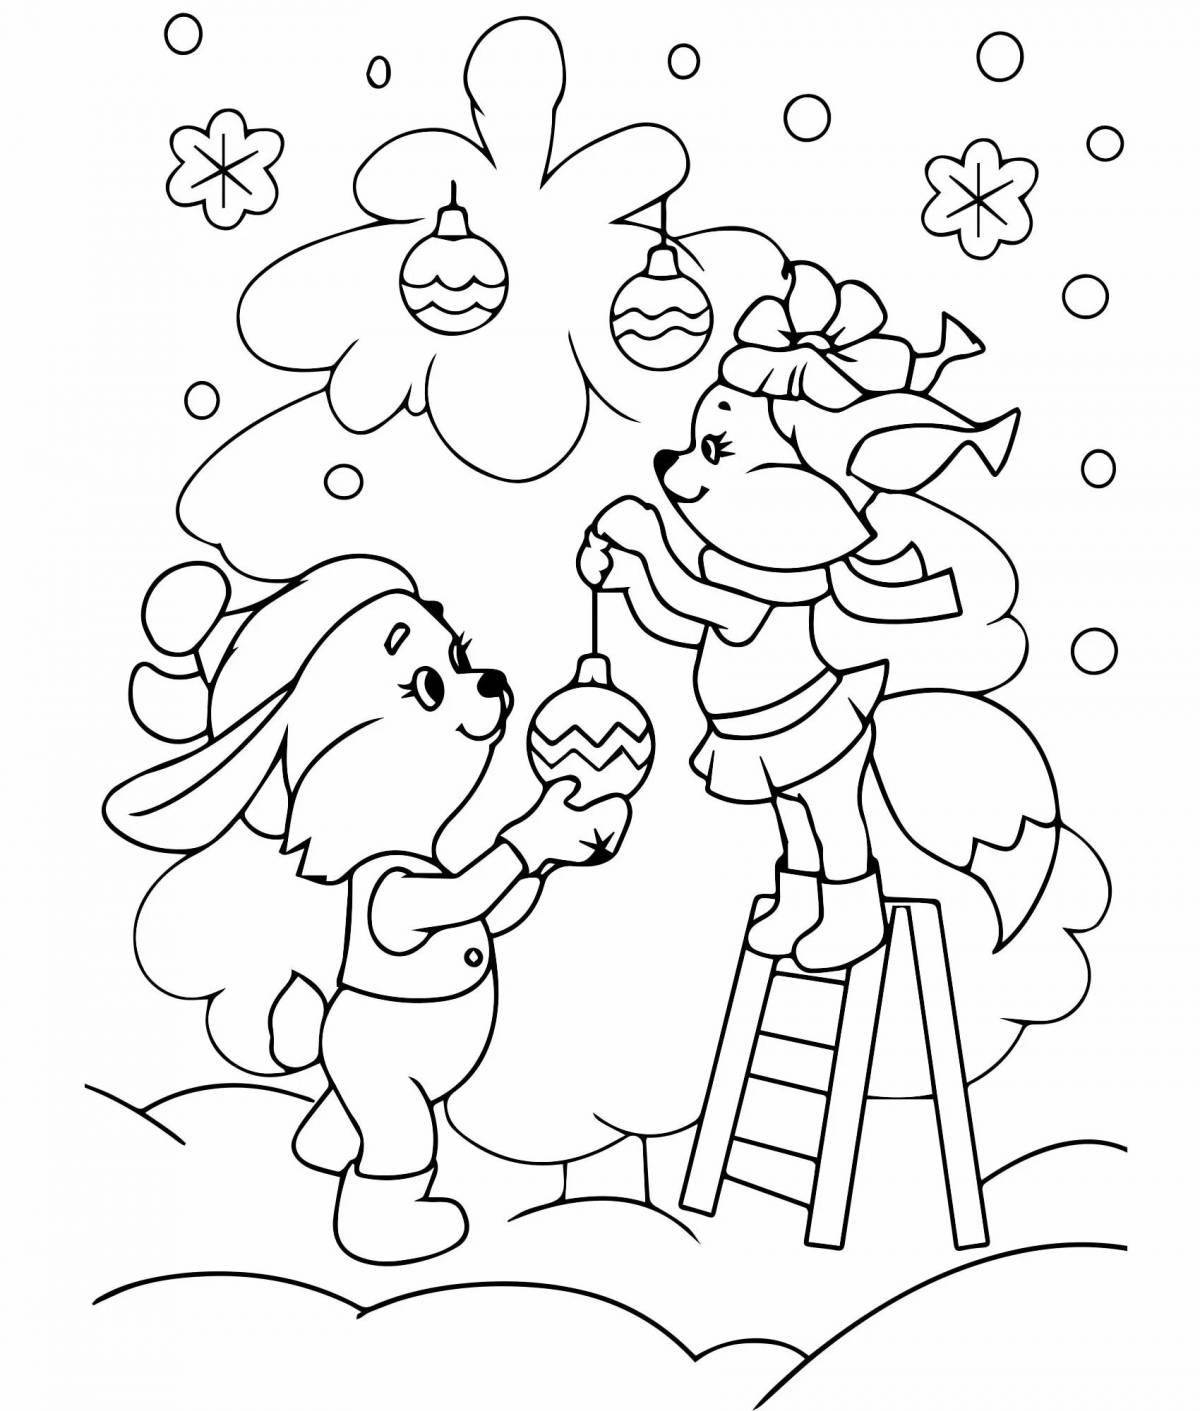 Merry Christmas coloring book for children